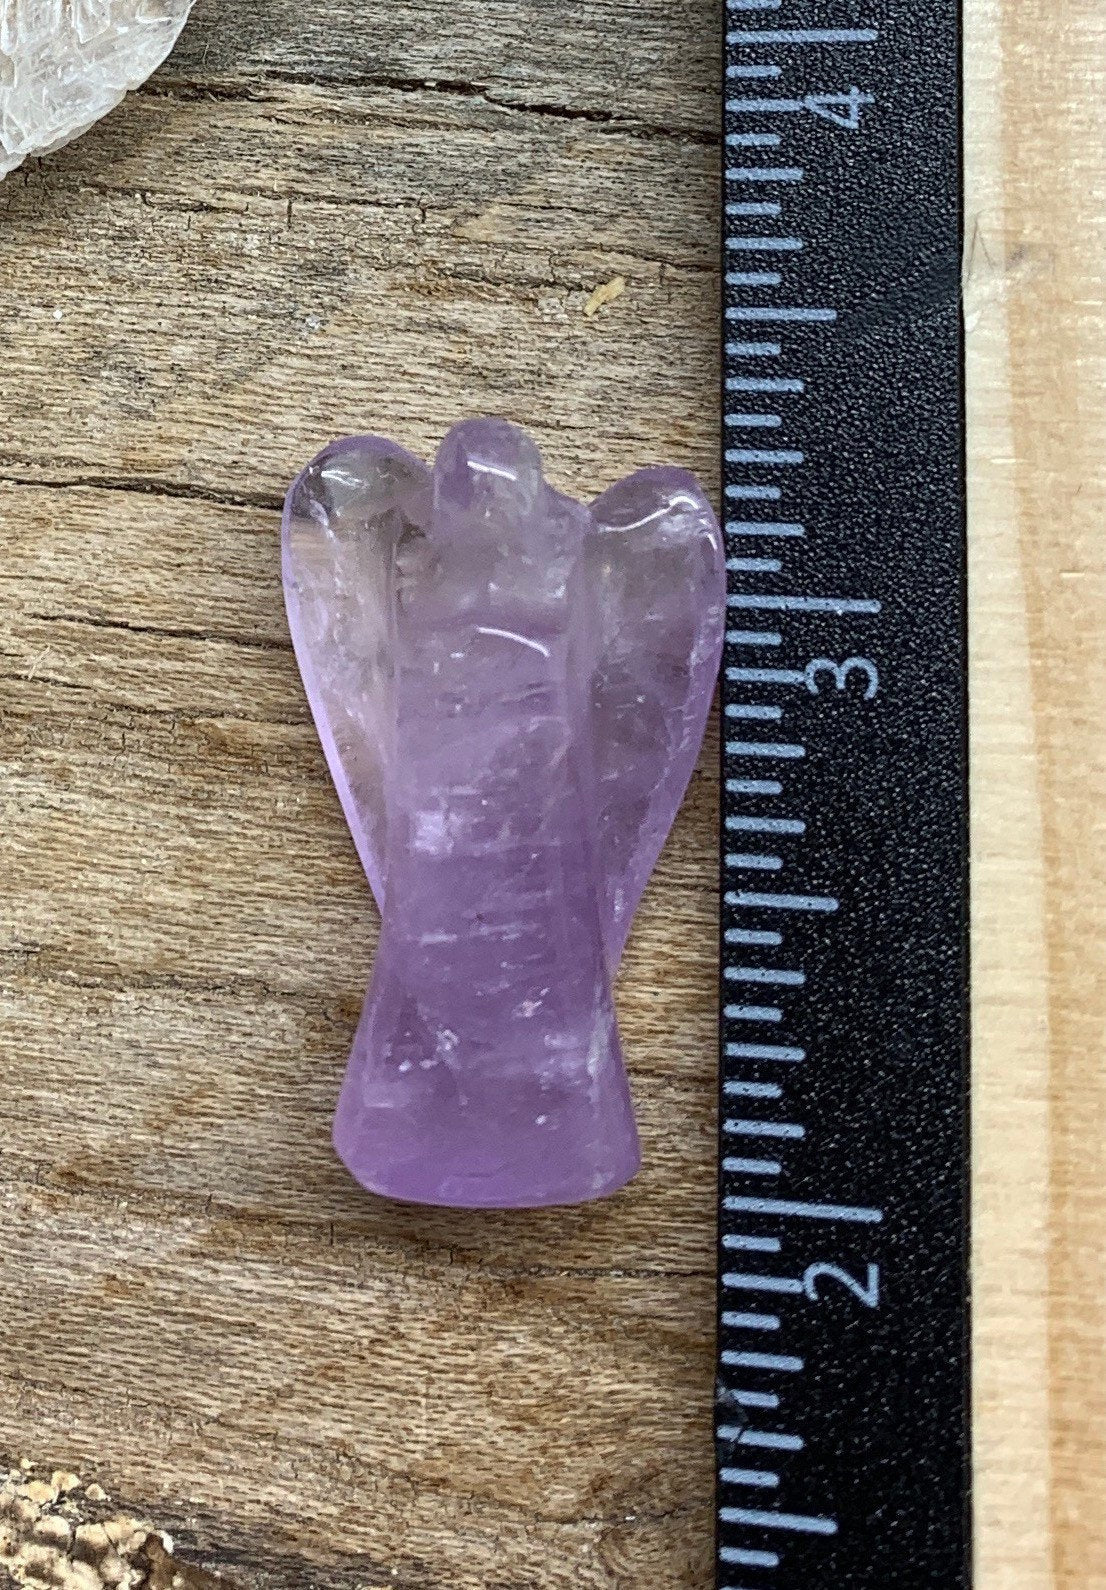 Small amethyst angel carving, featuring a serene and detailed design in translucent purple hues, displayed next to a ruler.  Amethyst Angel is approximately 1 1/4” tall.